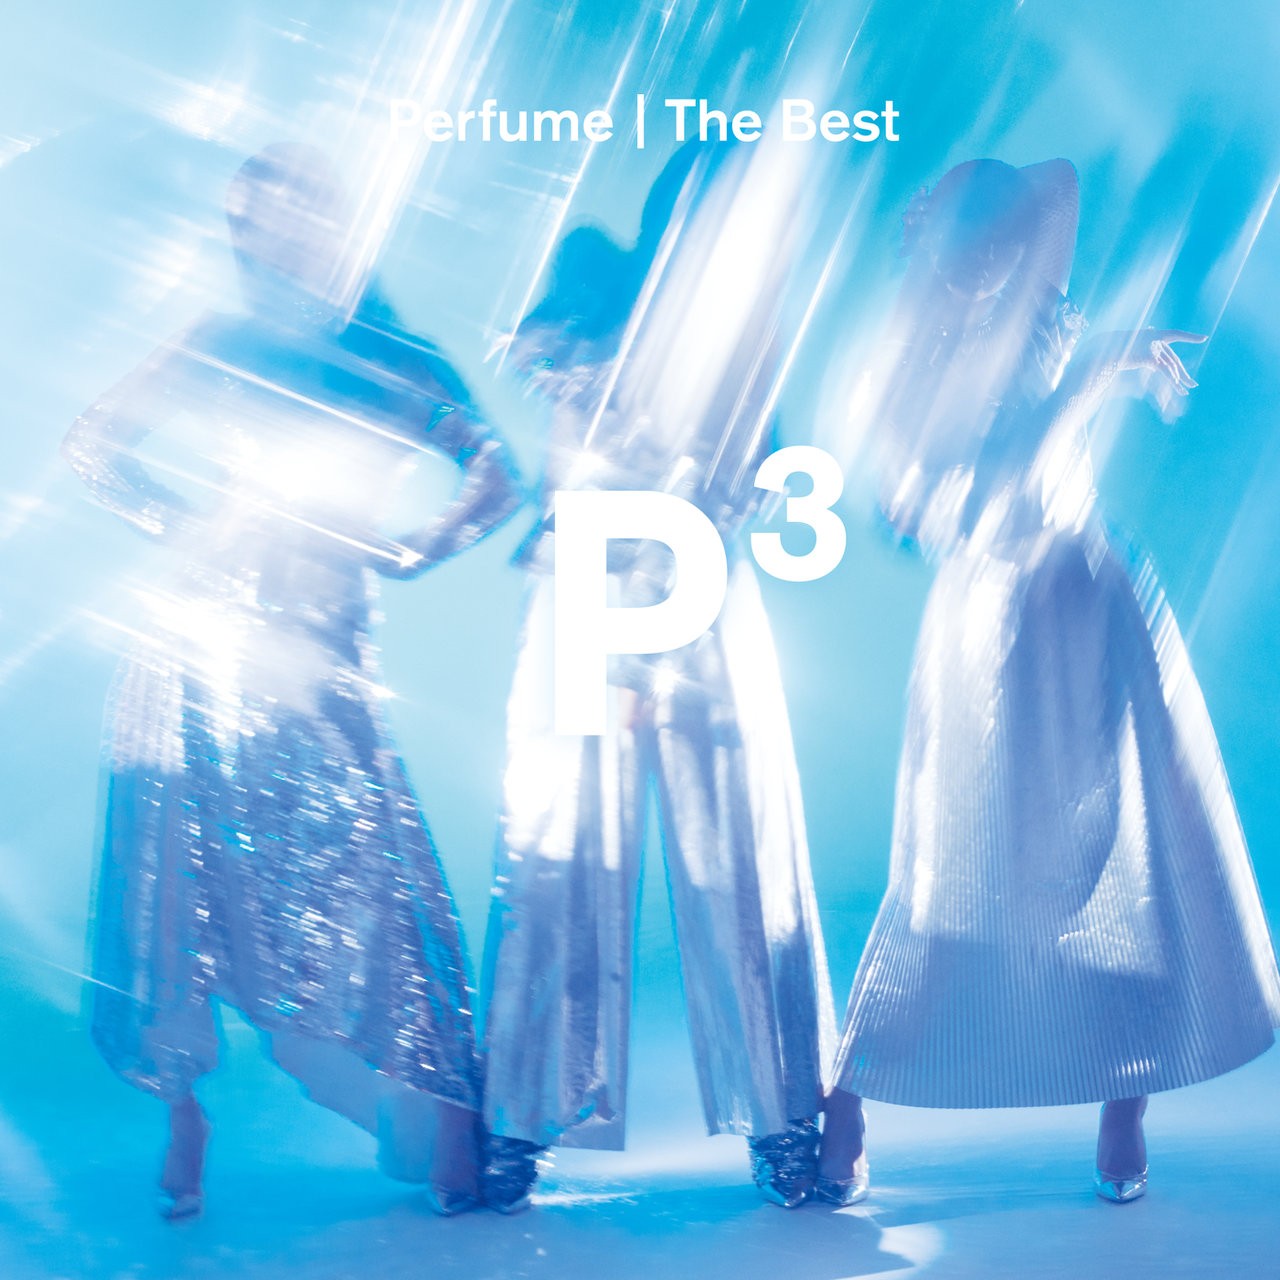 Perfume - Perfume The Best "P Cubed" (2019) [FLAC + MP3 320 + Blu-ray ISO]